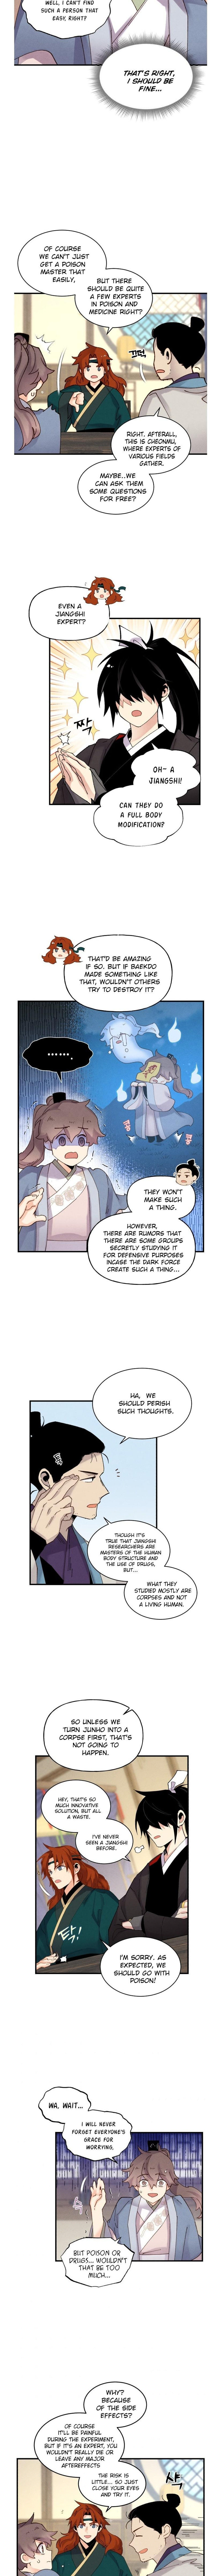 Lightning Degree - Chapter 83 Page 5